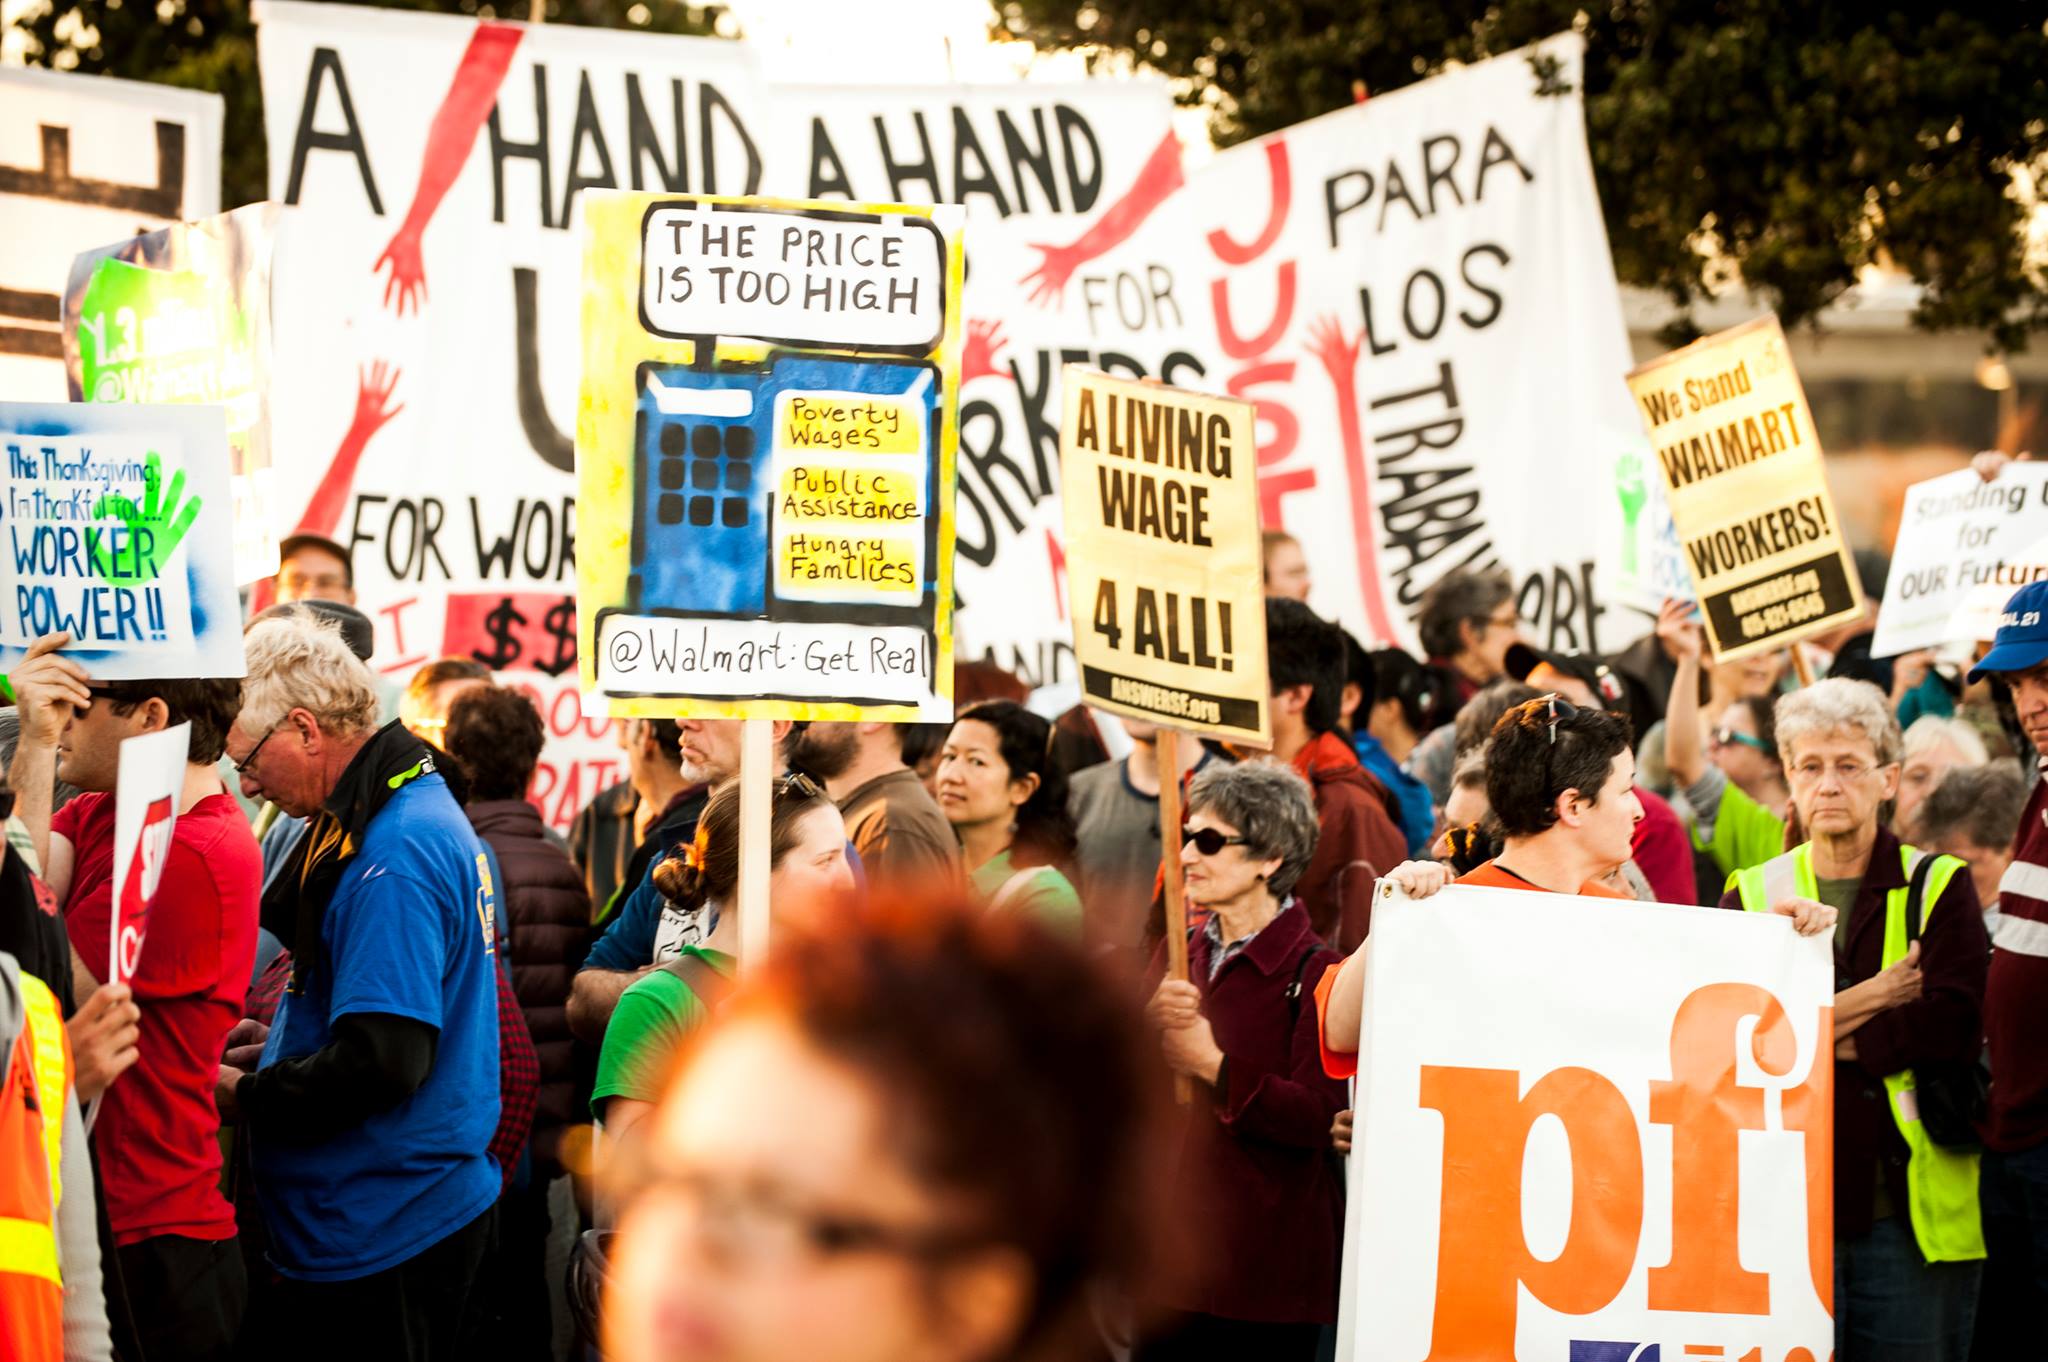 Protesters in a crowd at a Walmart protest. Various signs read, "A living wage 4 all!", "The price is too high - poverty wages - public assistance - hungry families", and "This Thanksgiving I'm thankful for worker power!"